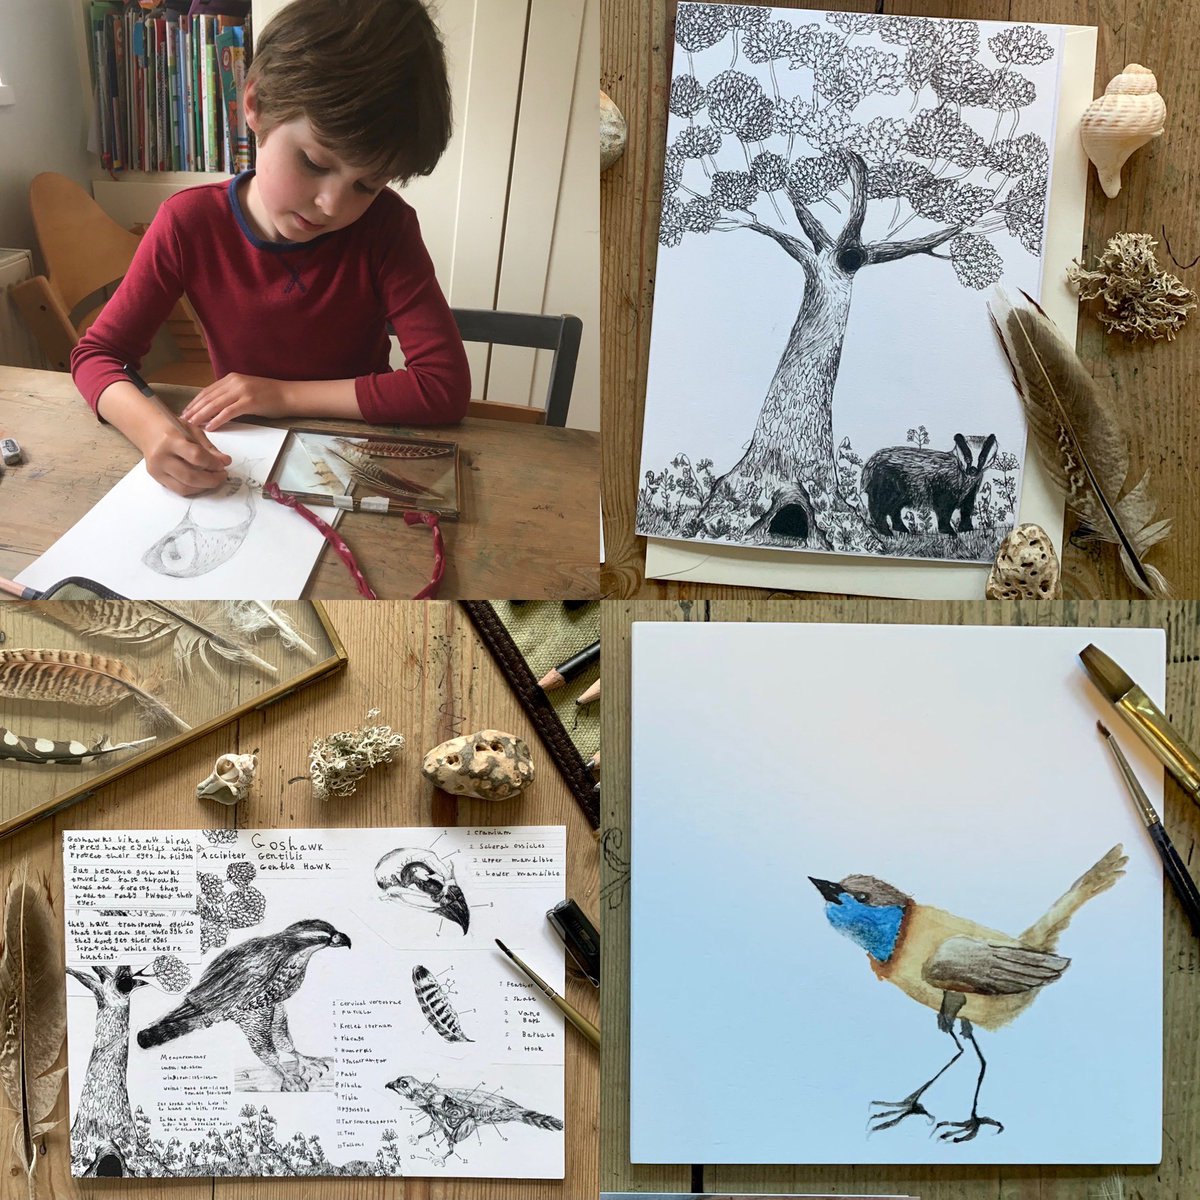 Drawn age 7 💙💛 Last prints and cards available in Benji’s Etsy shop! 🇺🇦🇺🇦🇺🇦 ALL proceeds will go to #Ukraine #PackedwithHope #campaign with @LittleToller and @Ofmooseandmen 
🙏💔 🇺🇦🇺🇦🇺🇦
 @ChrisGPackham  @lizbonnin @MichaelRosenYes @Team4Nature 
etsy.com/uk/shop/Benjam…